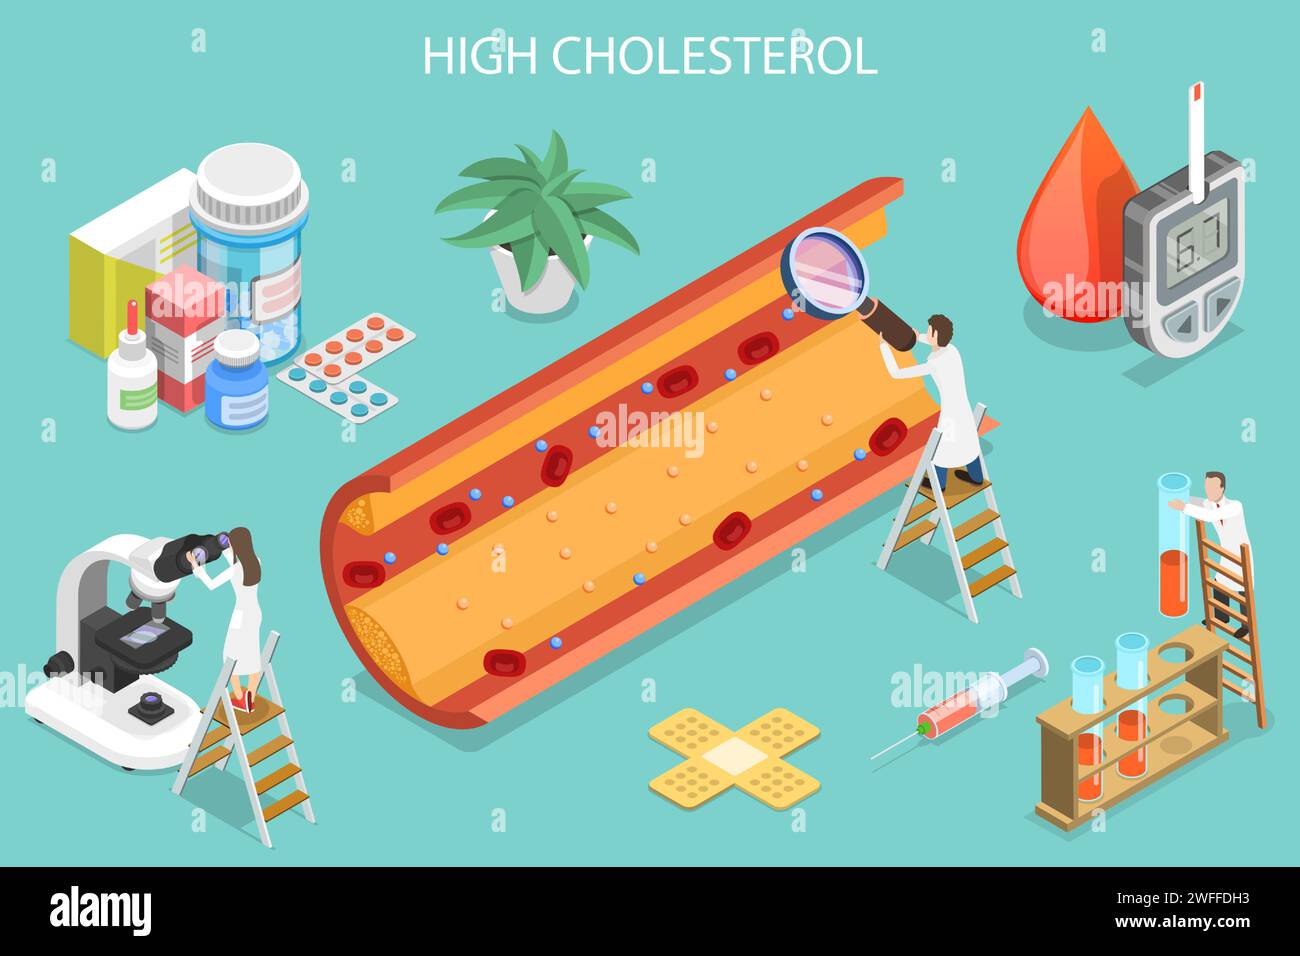 3D Isometric Flat Vector Conceptual Illustration of High Cholesterol Level, Health Risk, Blood Flow. Stock Vector